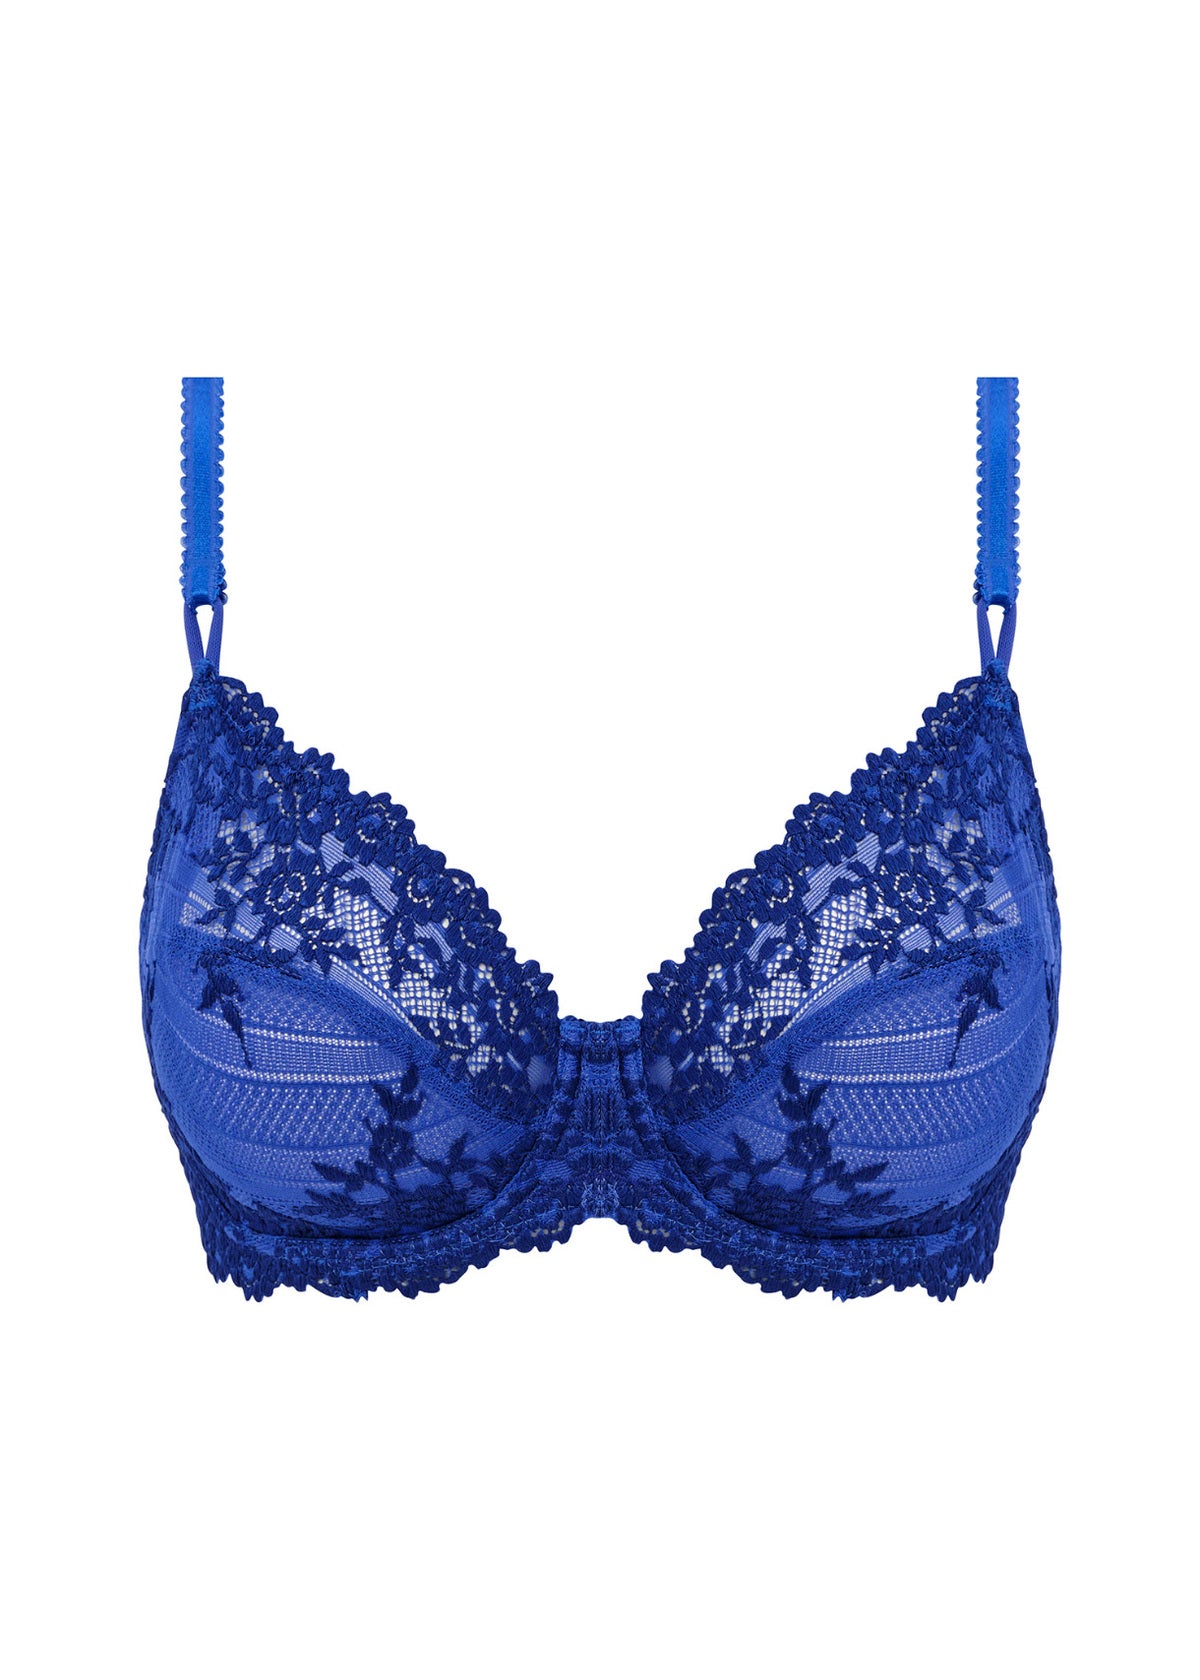 Wacoal Embrace Lace Underwired Bra - Beaucoup Blue / Bellwether Blue